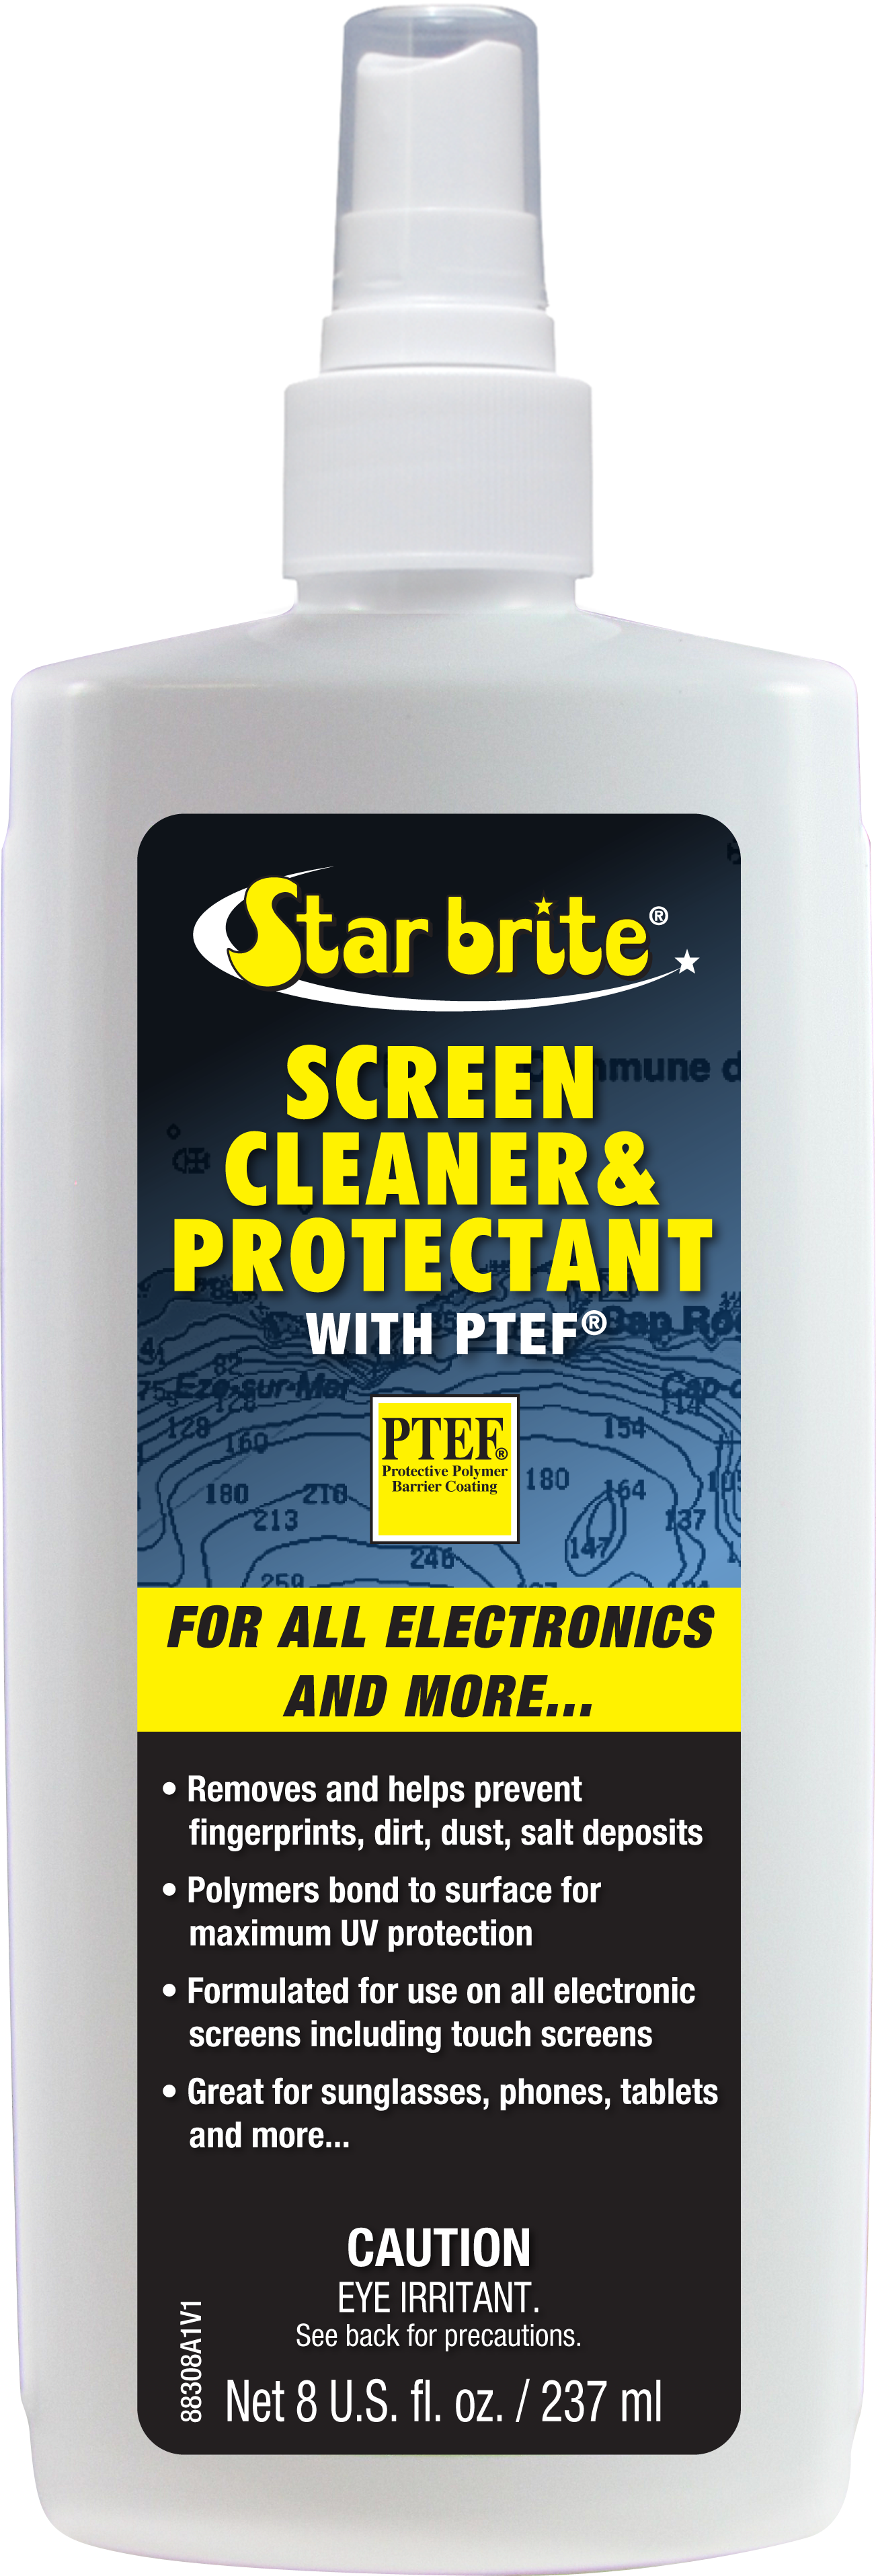 <p>Star Brite</p> <p>Screen Cleaner & Protectant</p> <p>Those expensive electronics on your boat have screens always being blasted by the sun and weather. This cleaner and protectant keeps them shielded and can be used on sunglasses, phones, tablets and even TVs.</p> 